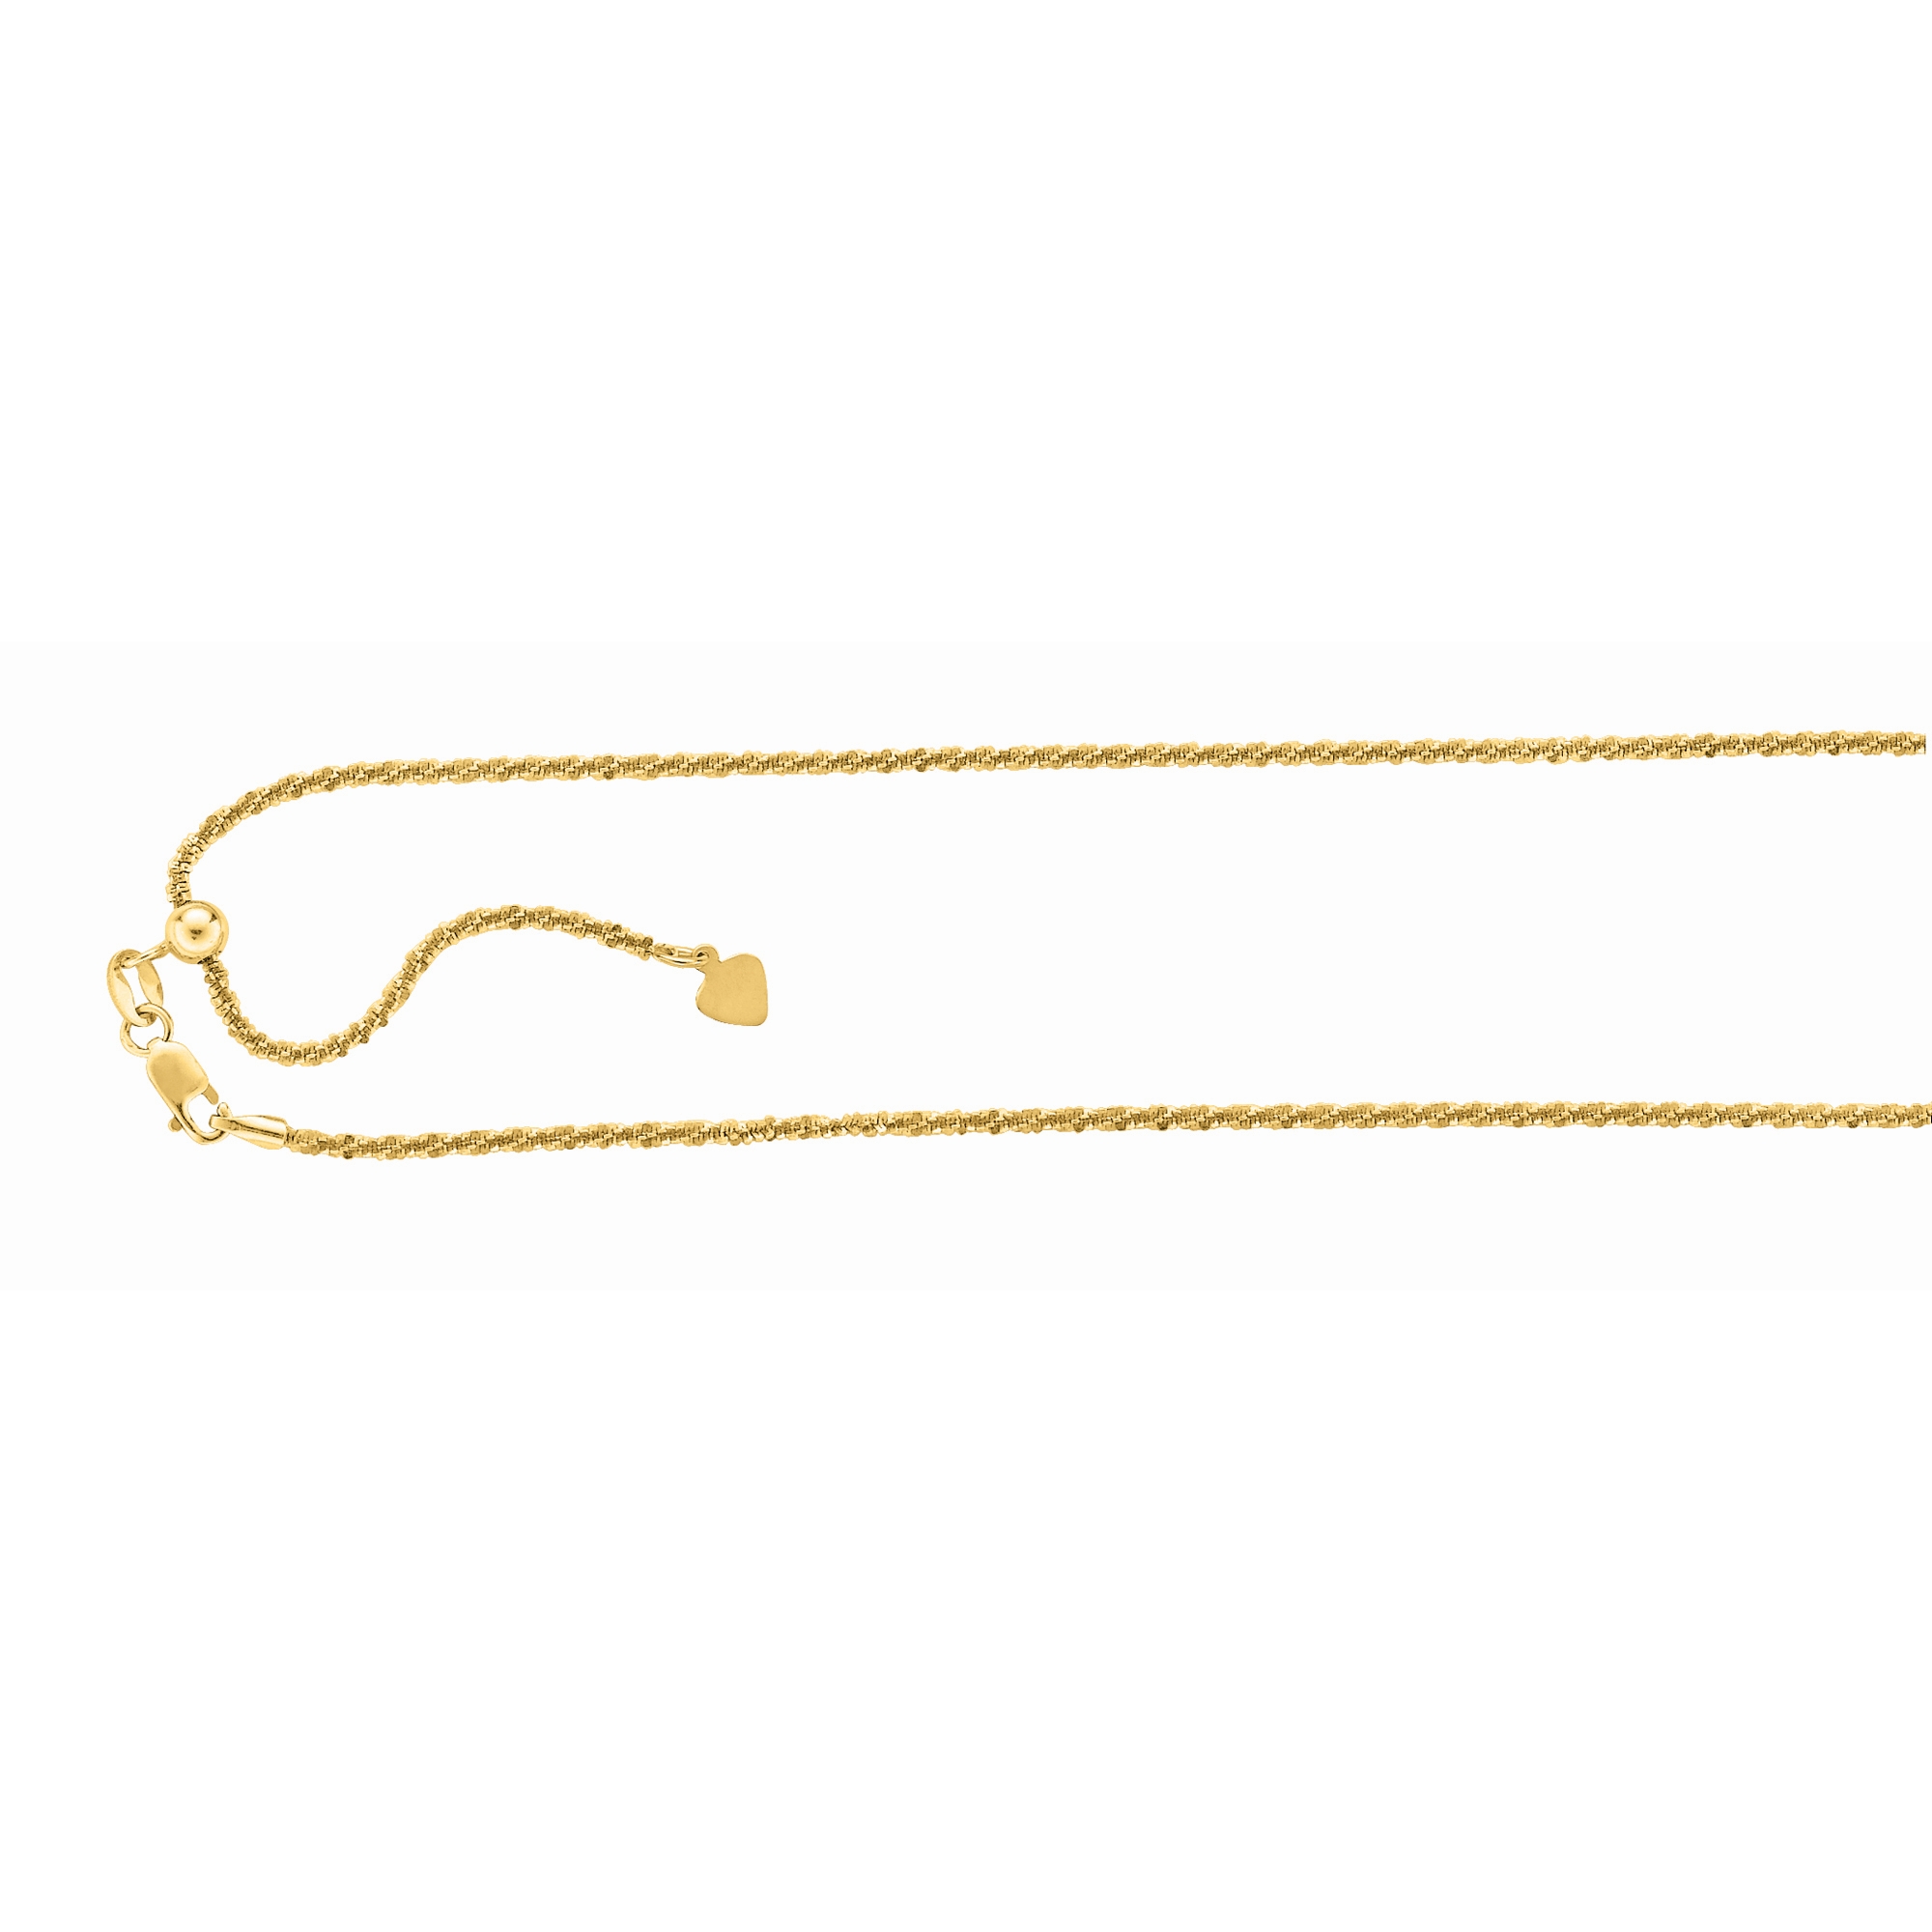 Silver 22 inches with Yellow Finish 1.5mm Diamond Cut Adjustable Sparkle Chain with Lobster Clasp